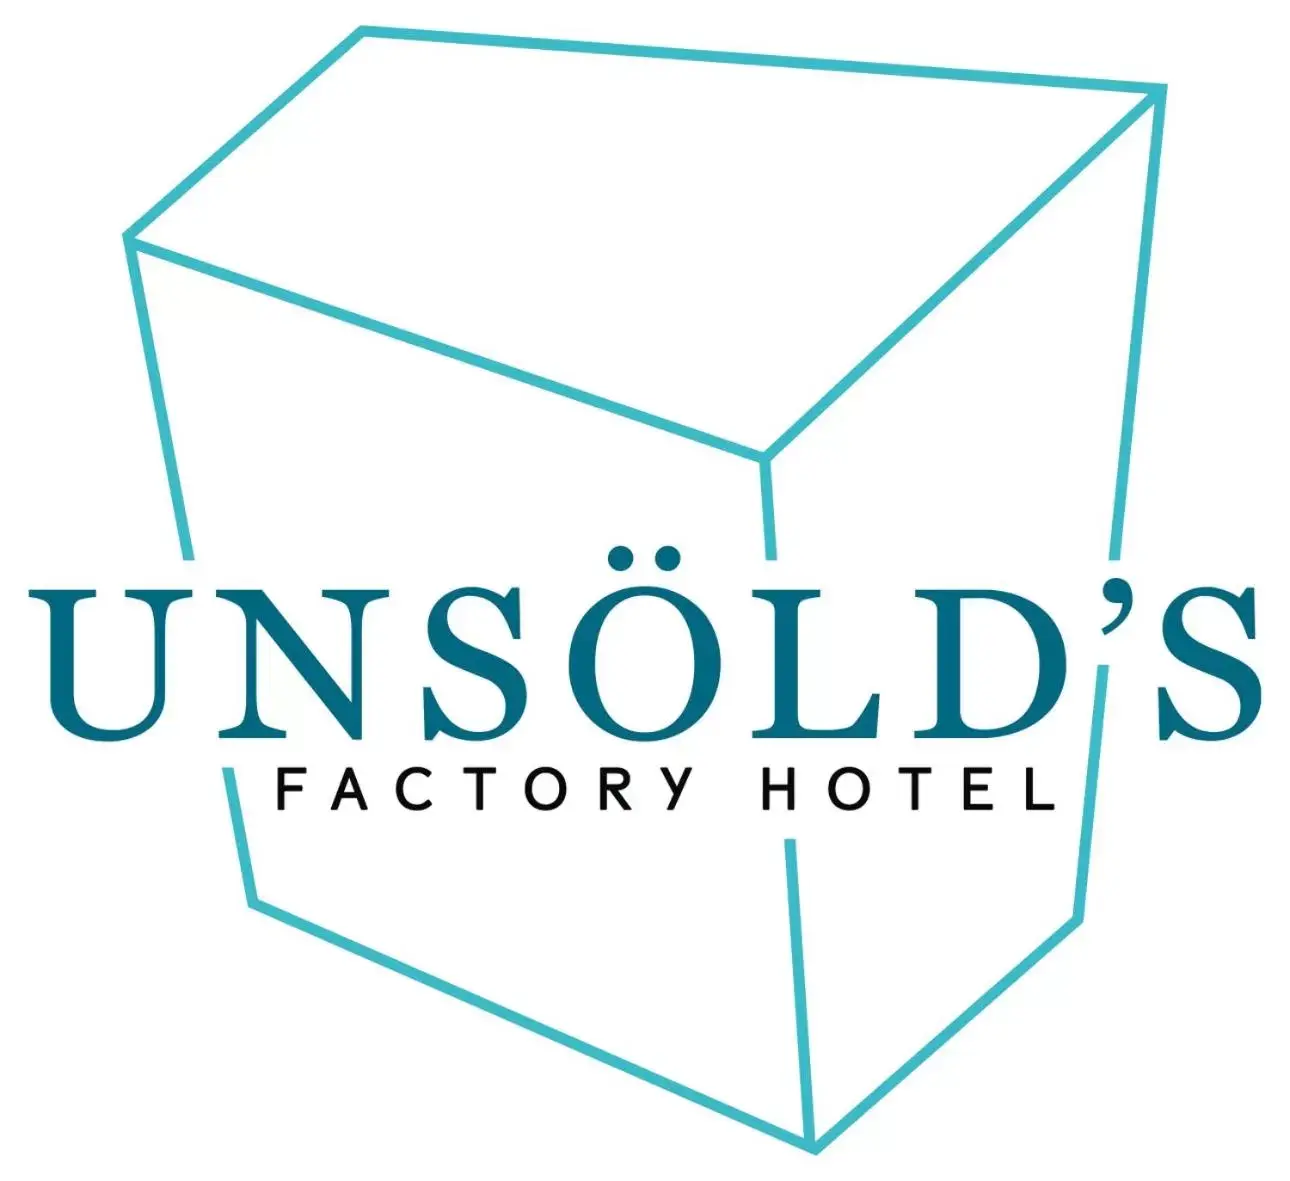 Property logo or sign in Unsöld's Factory Hotel